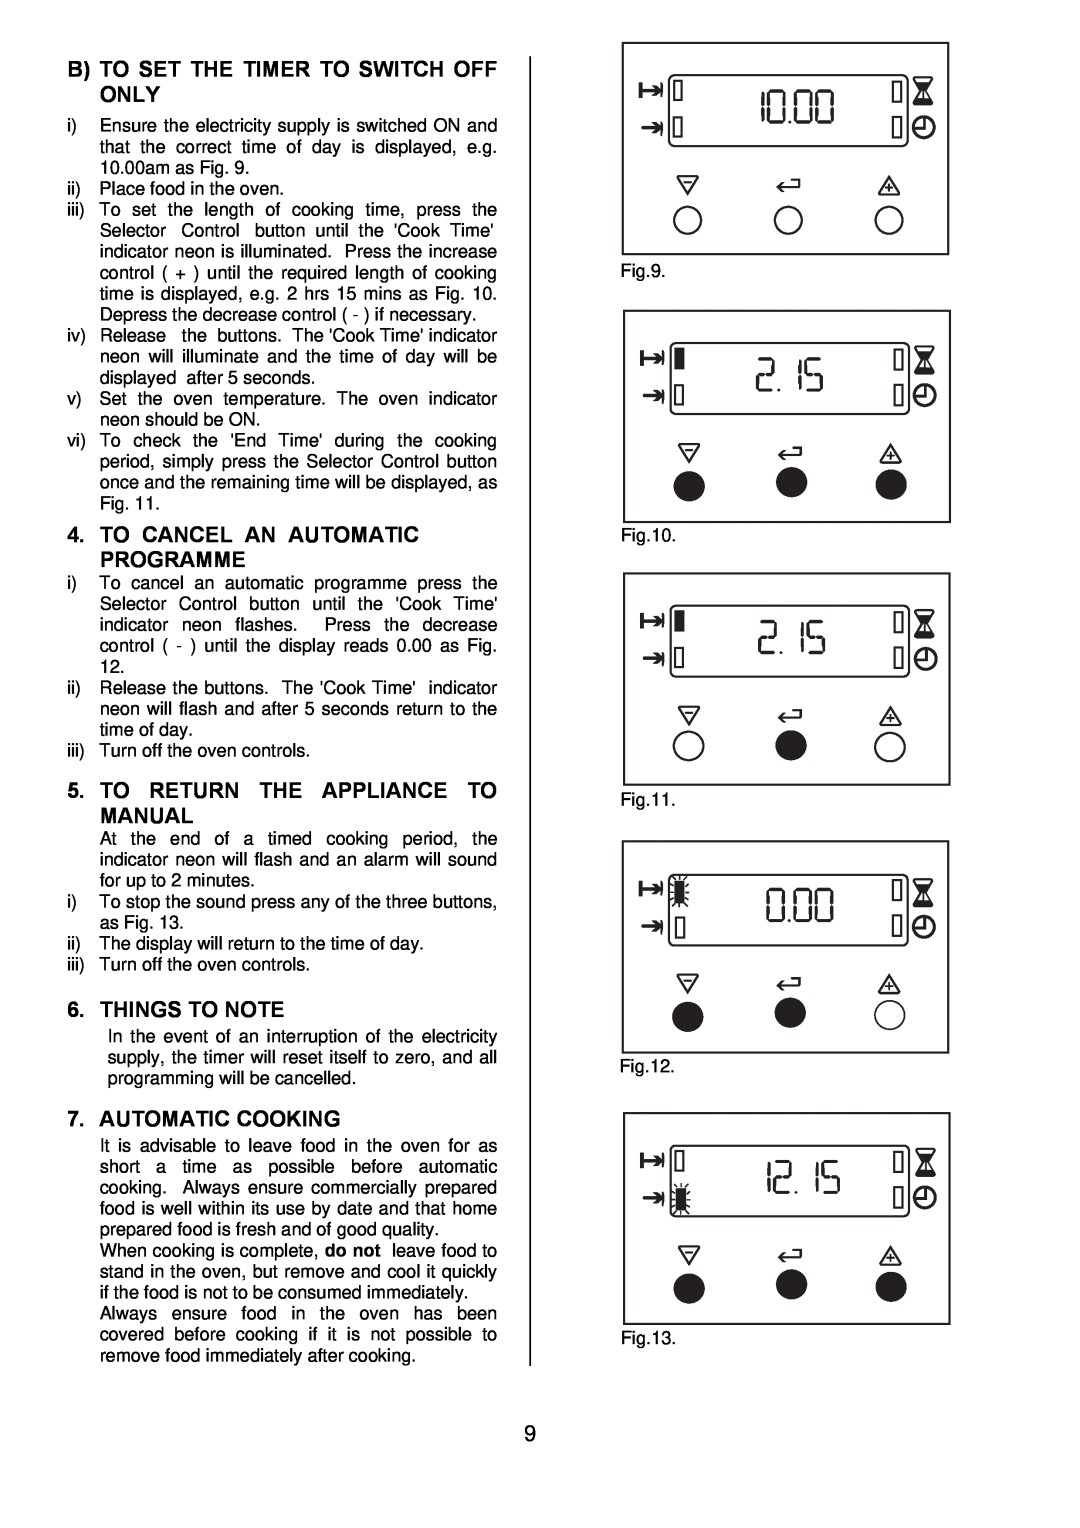 Electrolux EKC6044, EKC6045 manual B To Set The Timer To Switch Off Only, To Cancel An Automatic Programme, Things To Note 